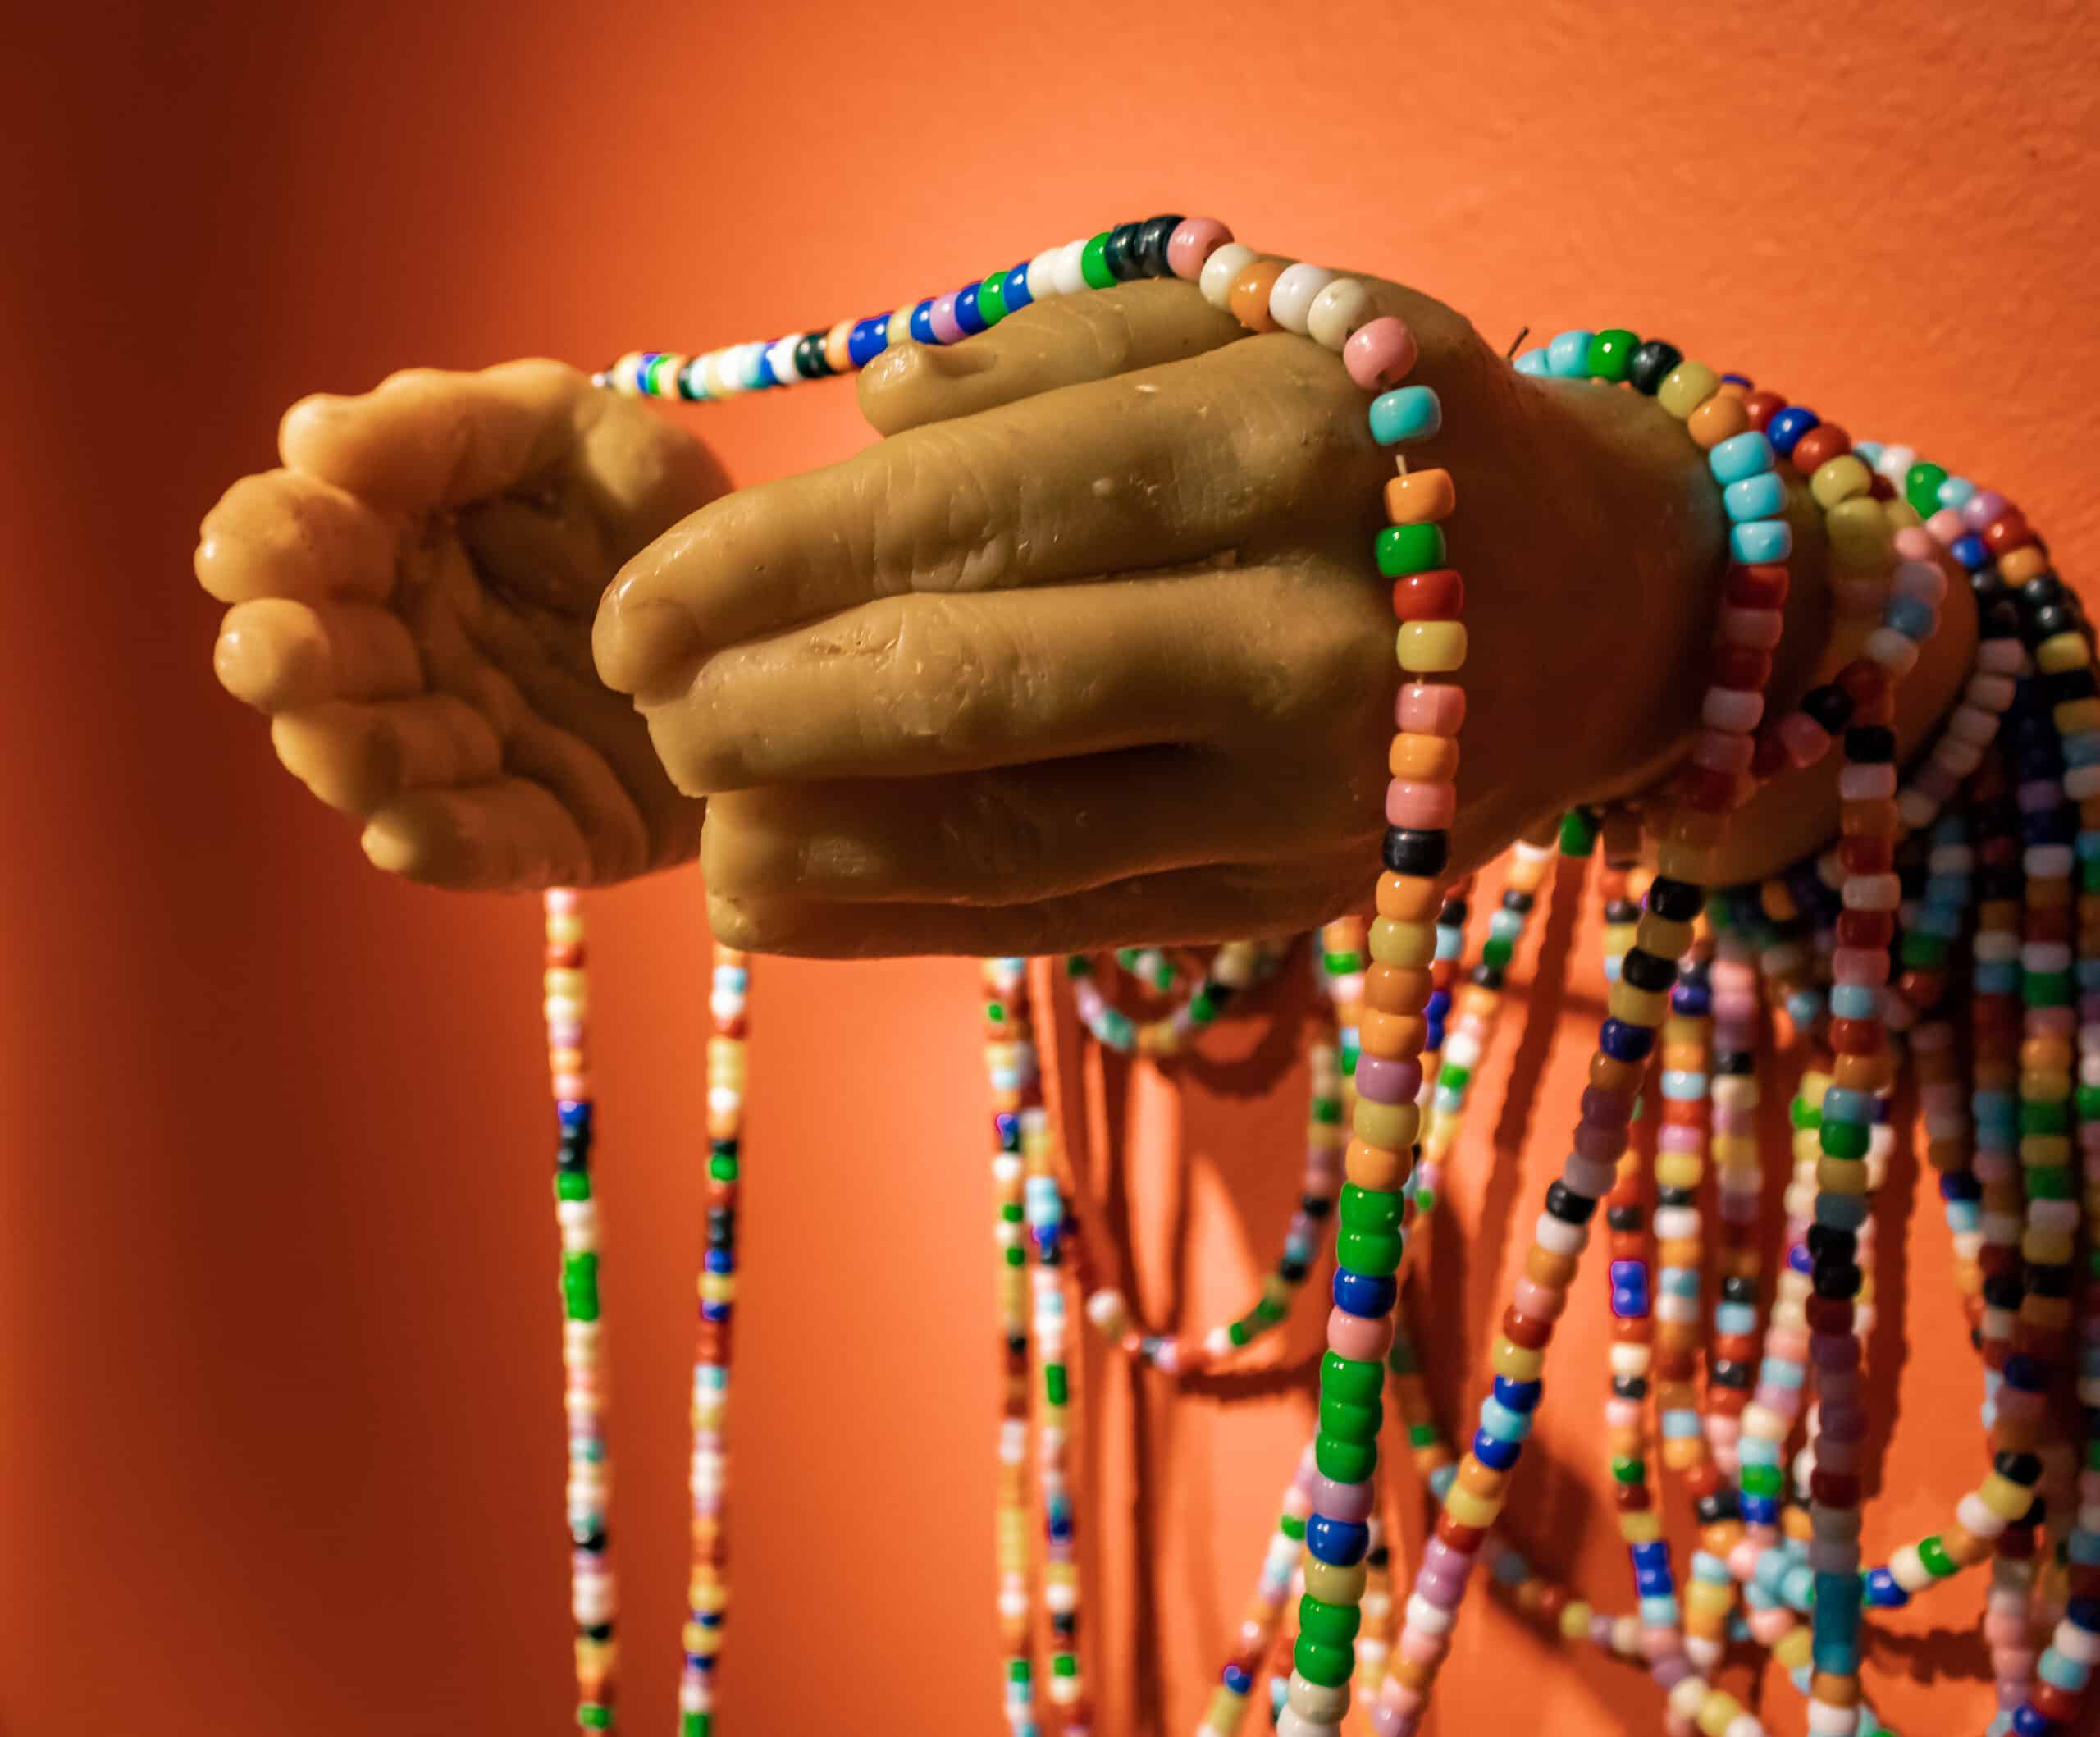 The artists' hands cast in tan wax and wrapped in draping strings of colorful pony beads